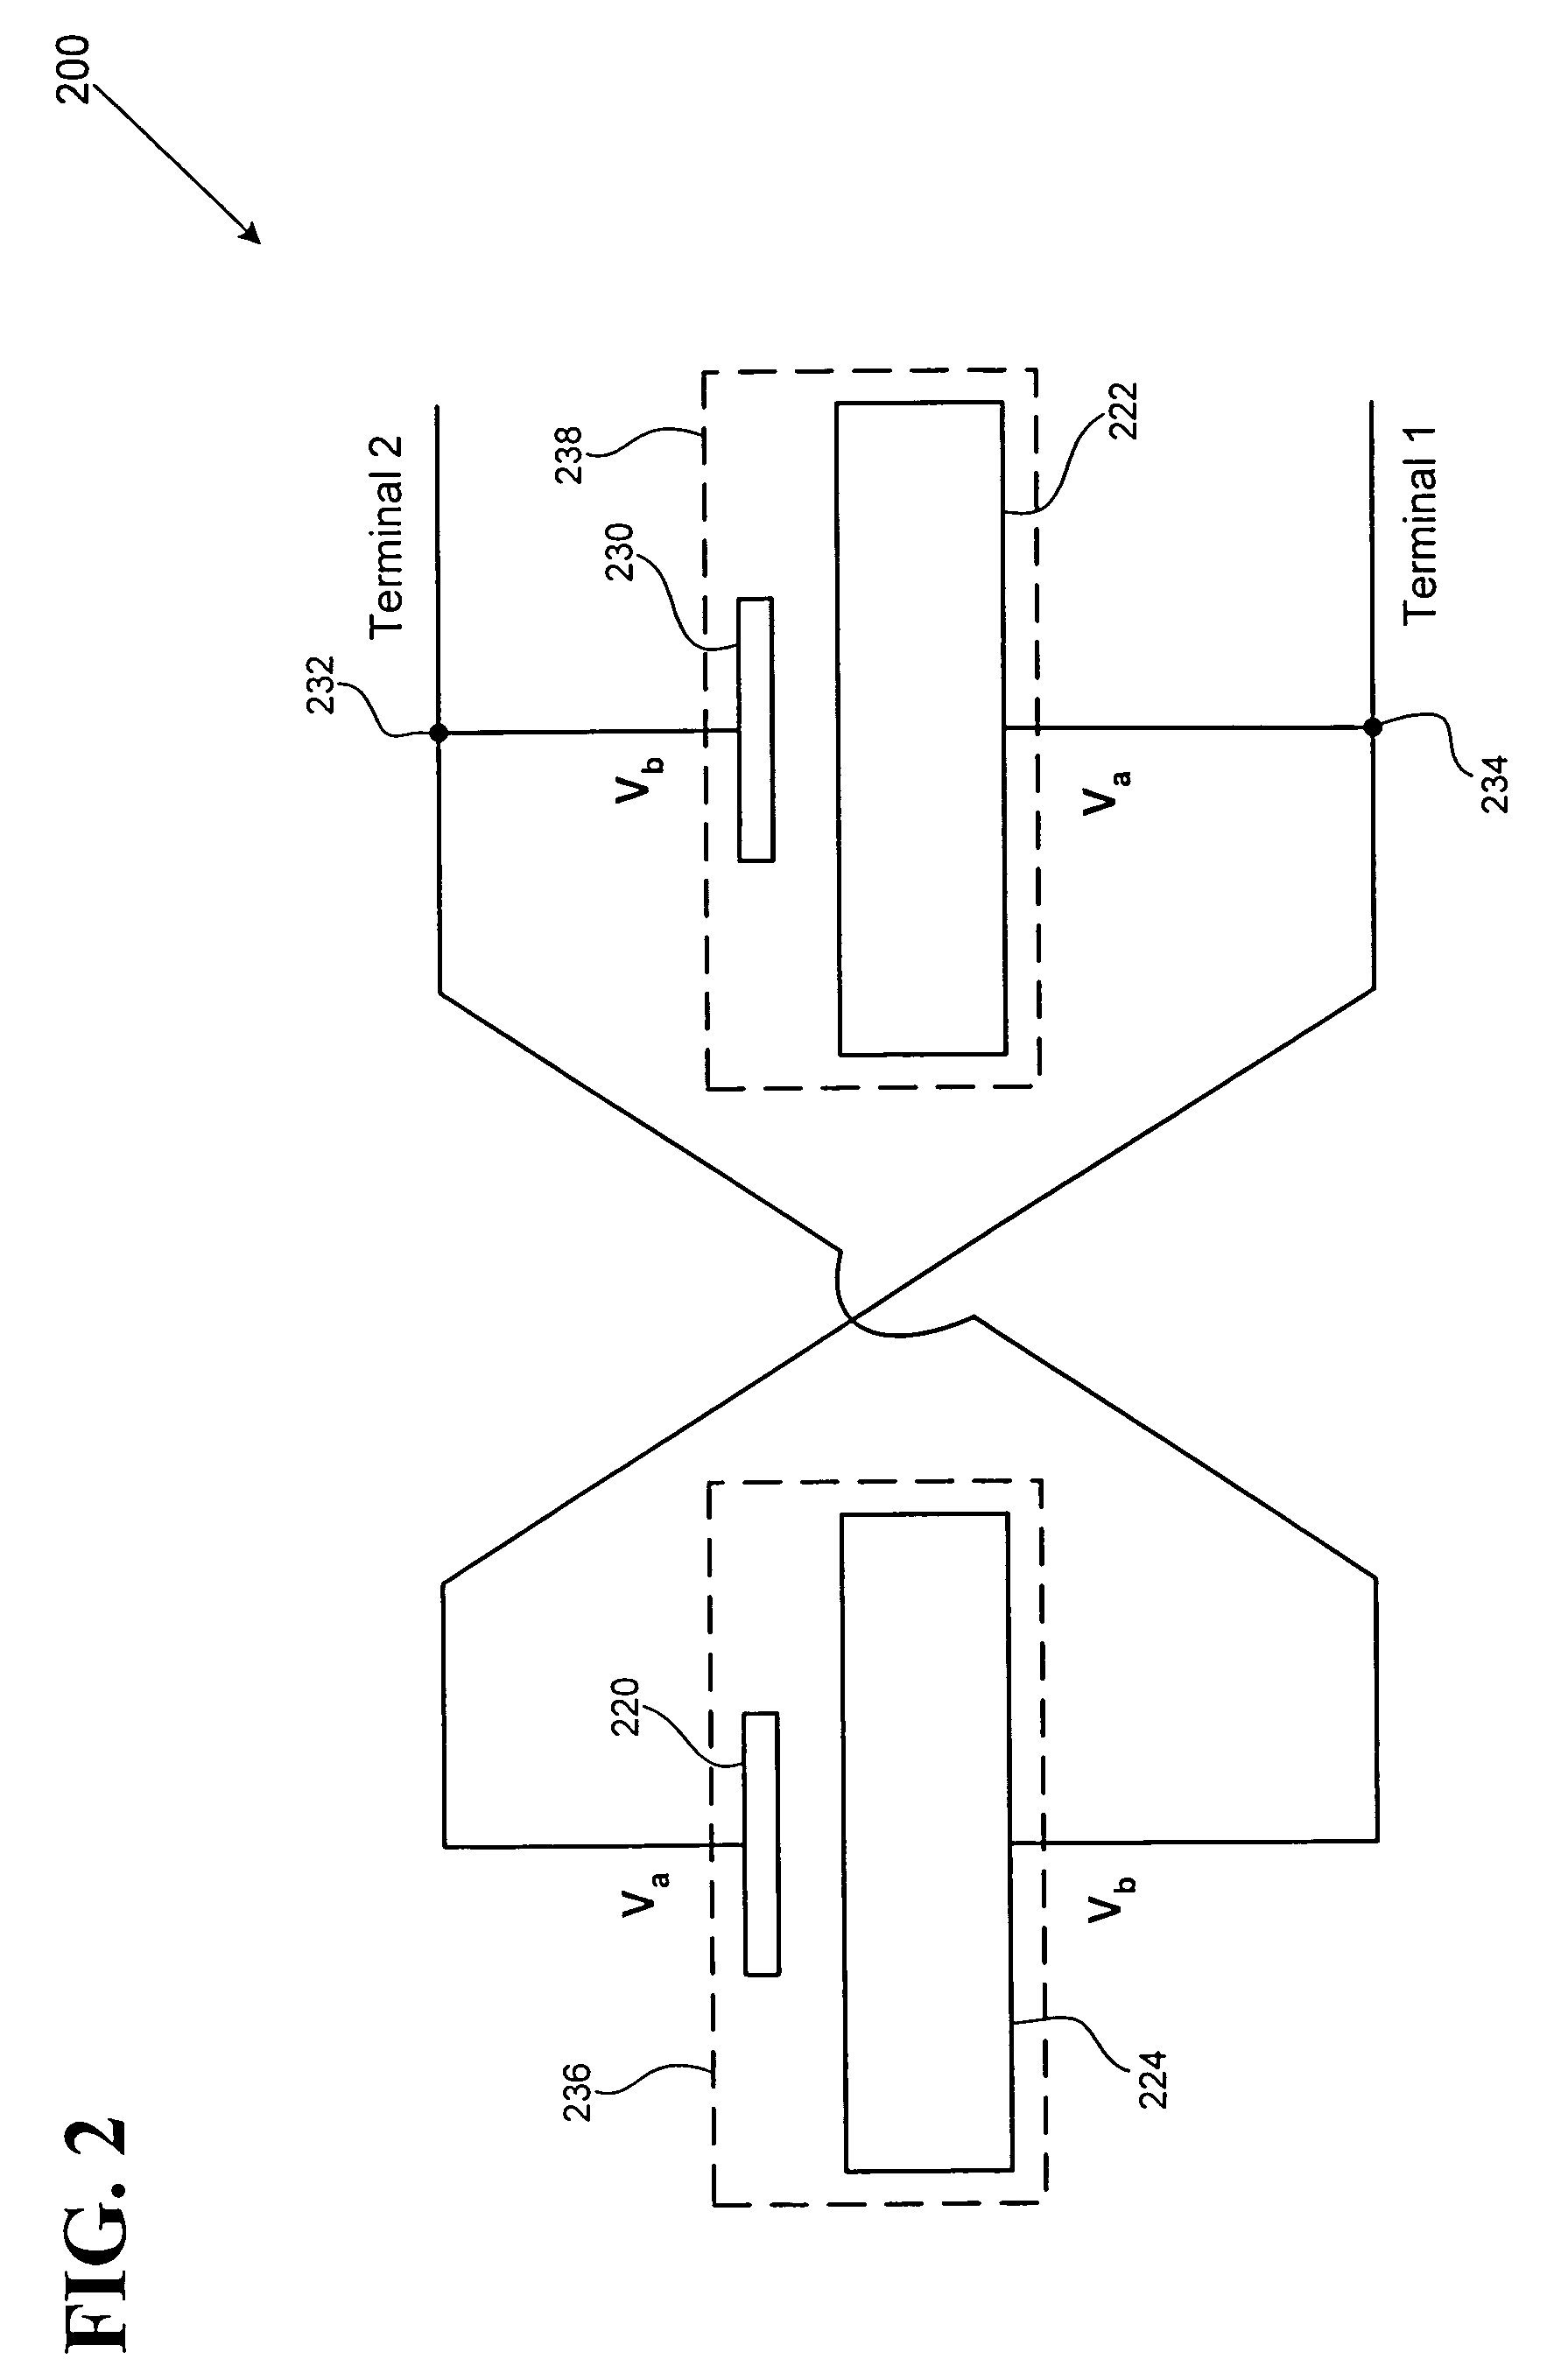 Method for fabricating a high density composite MIM capacitor with reduced voltage dependence in semiconductor dies